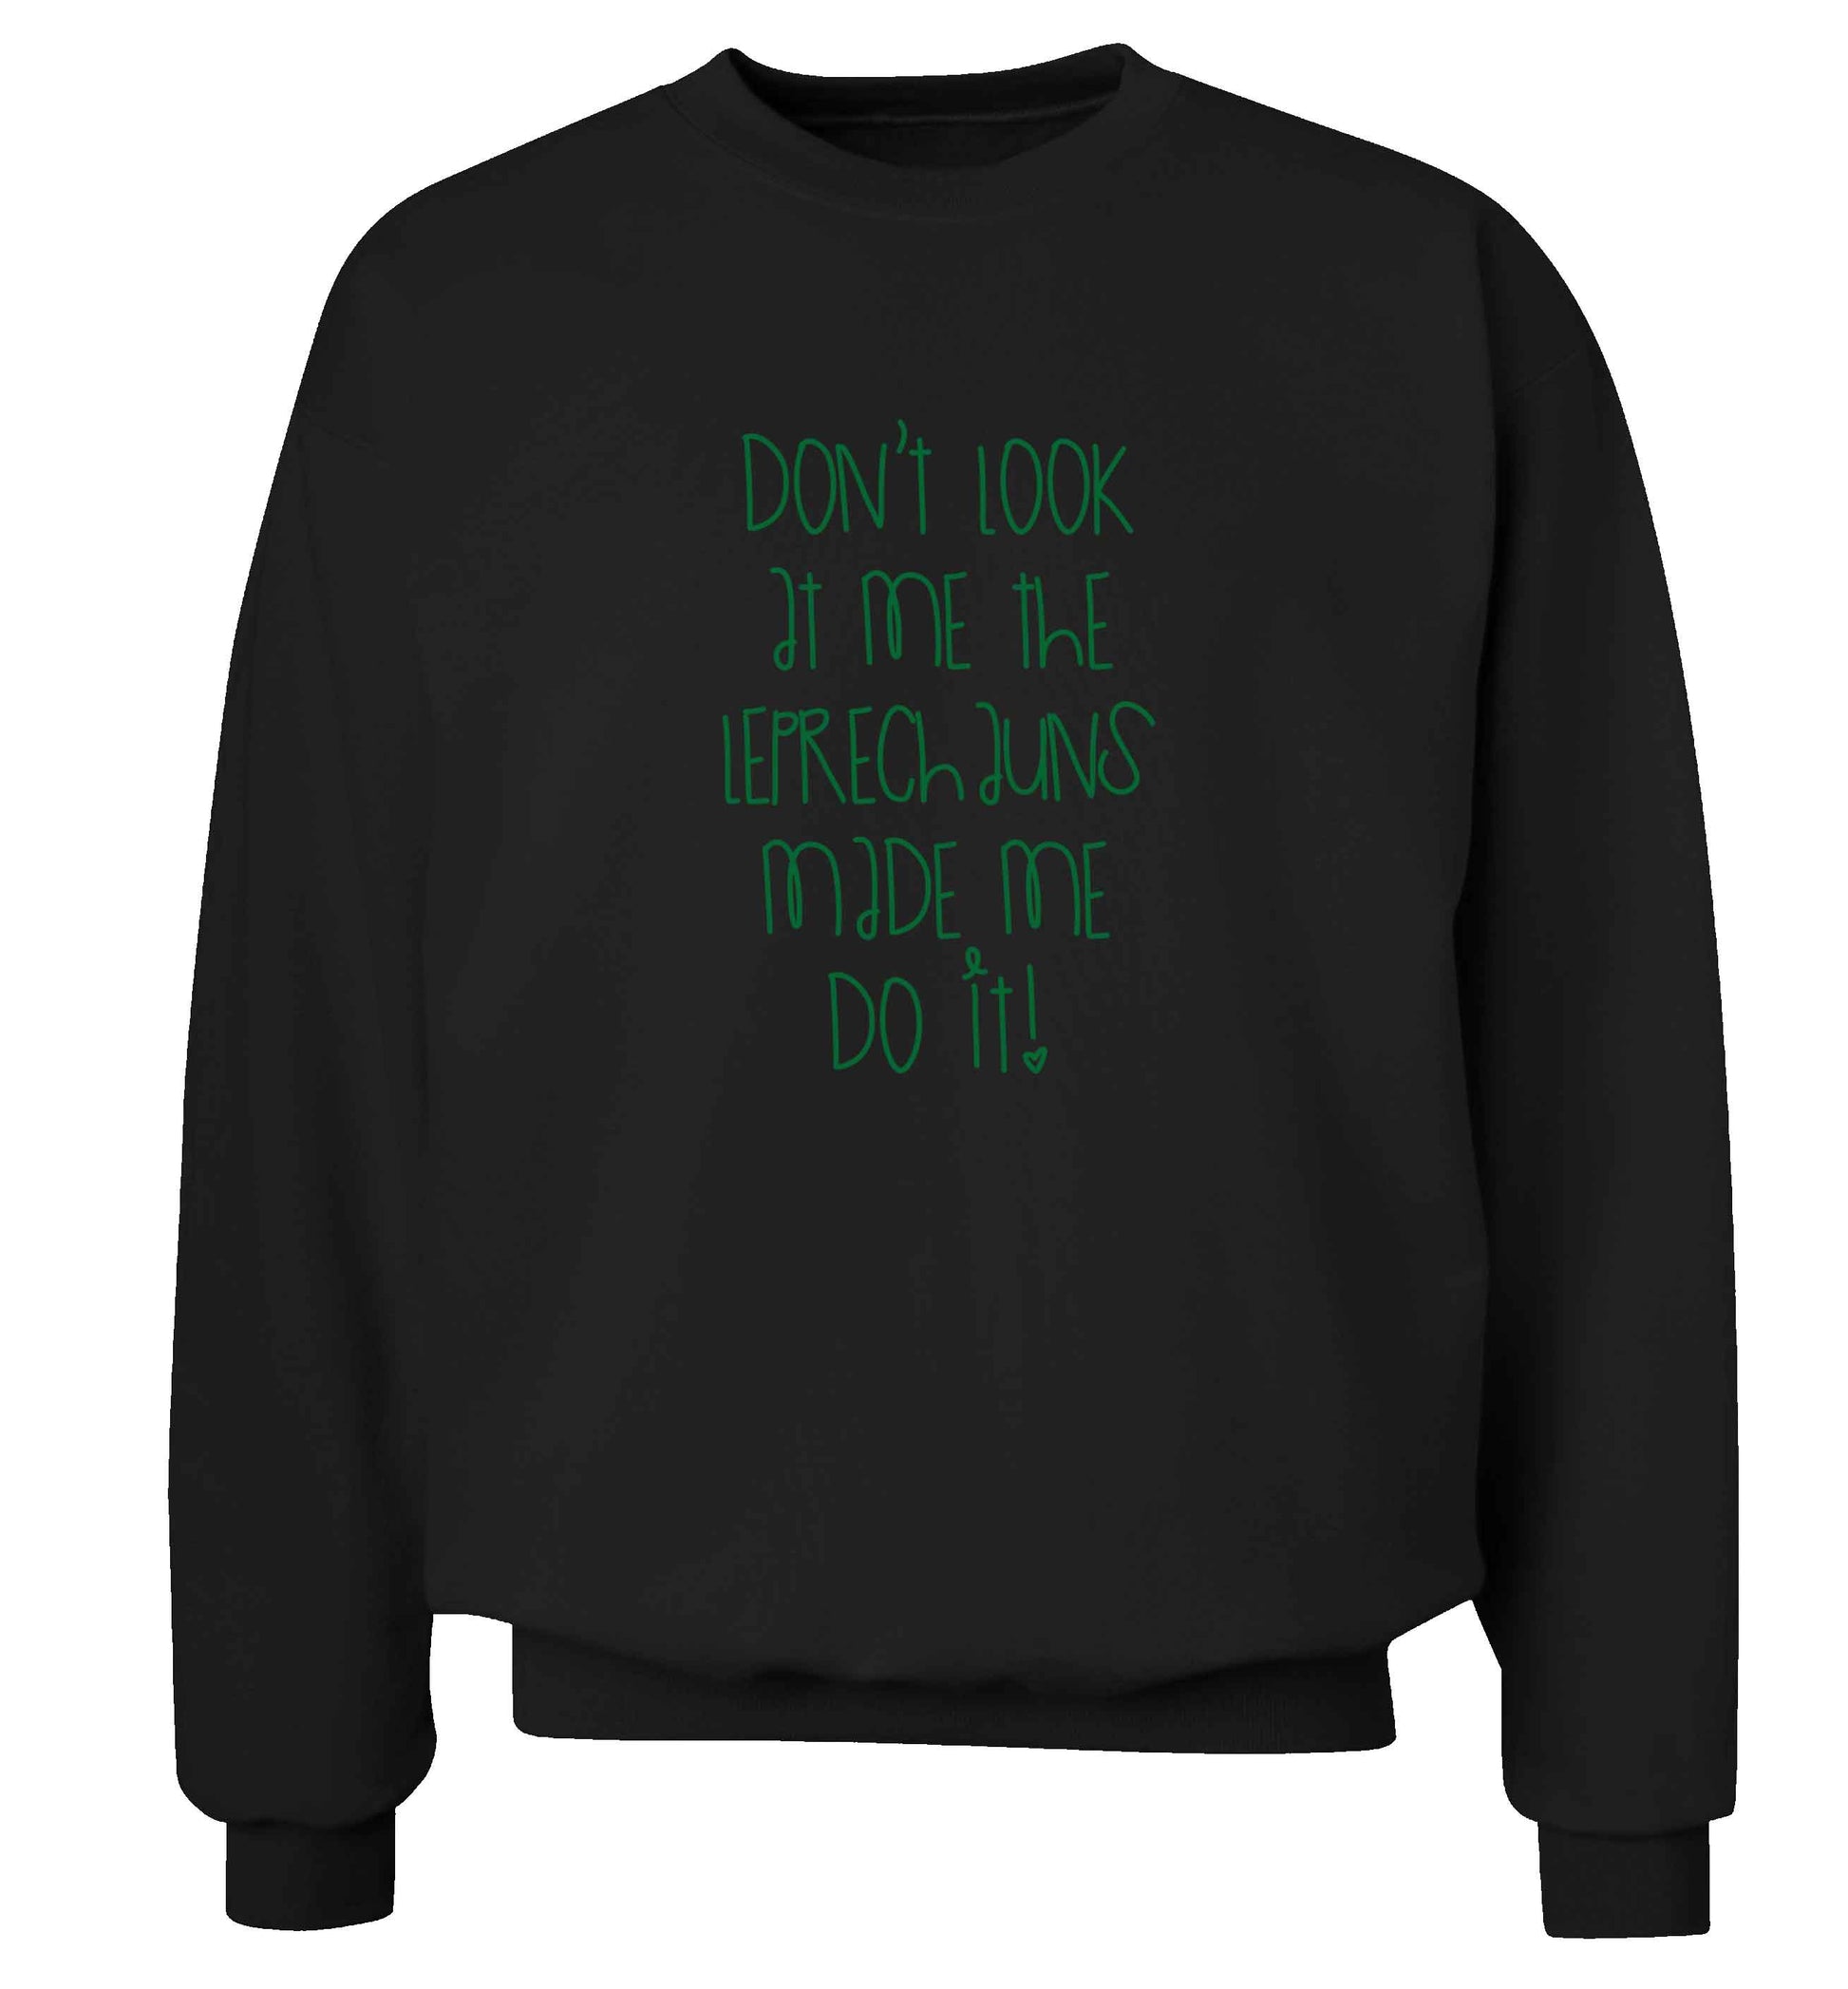 Don't look at me the leprechauns made me do it adult's unisex black sweater 2XL